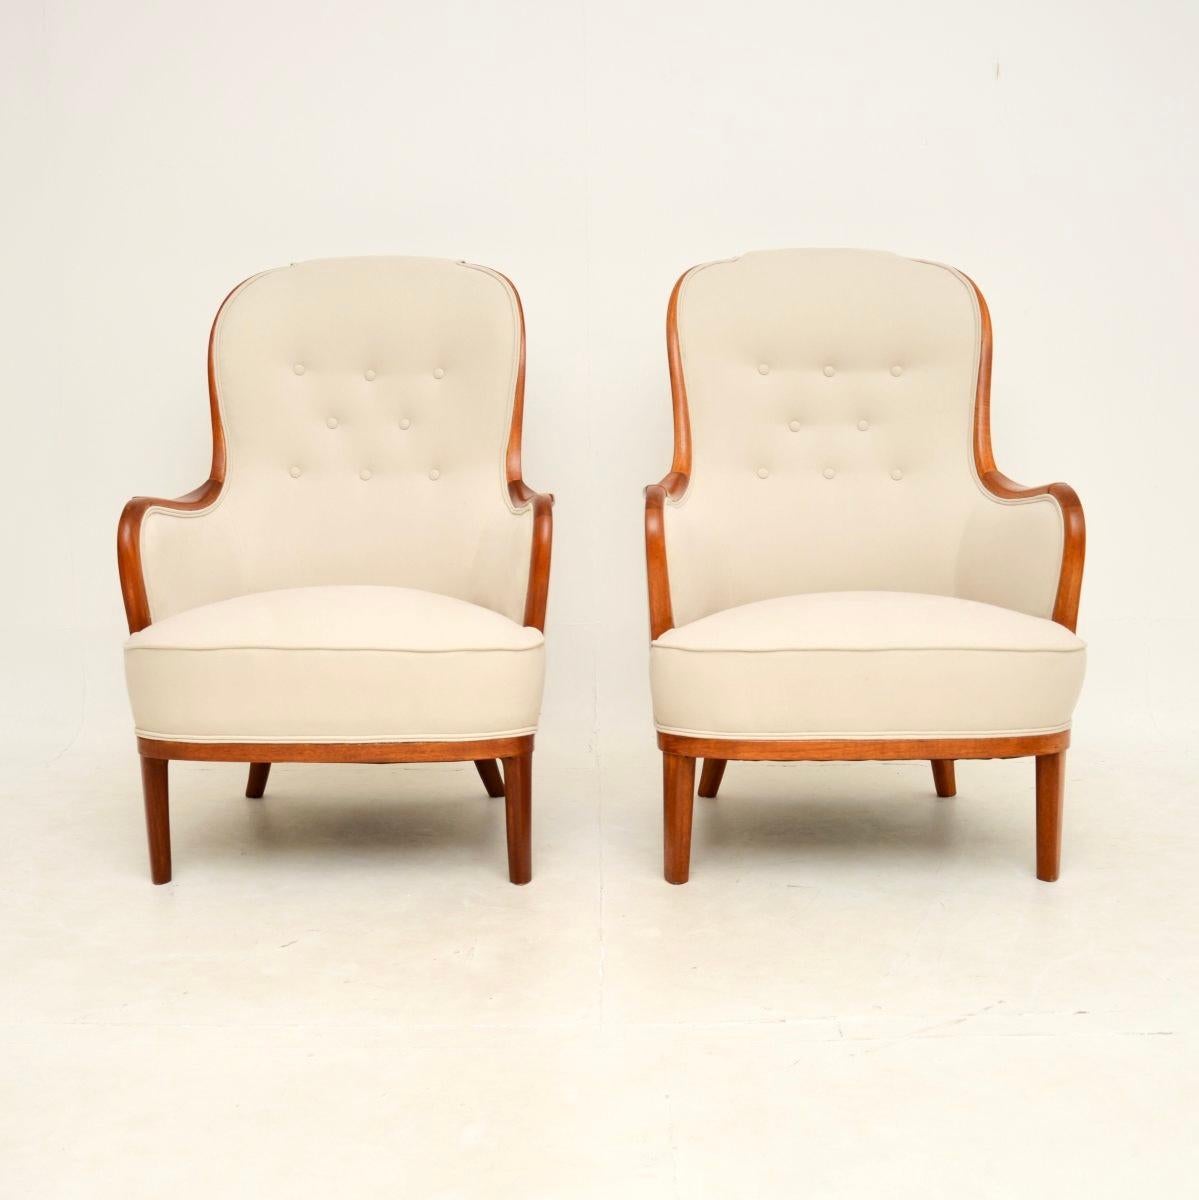 A stunning and exceedingly rare pair of vintage Swedish armchairs by Carl Malmsten. They were recently imported from Sweden, they date from the 1940-50’s.

This early model is of superb quality with generous proportions, they are extremely